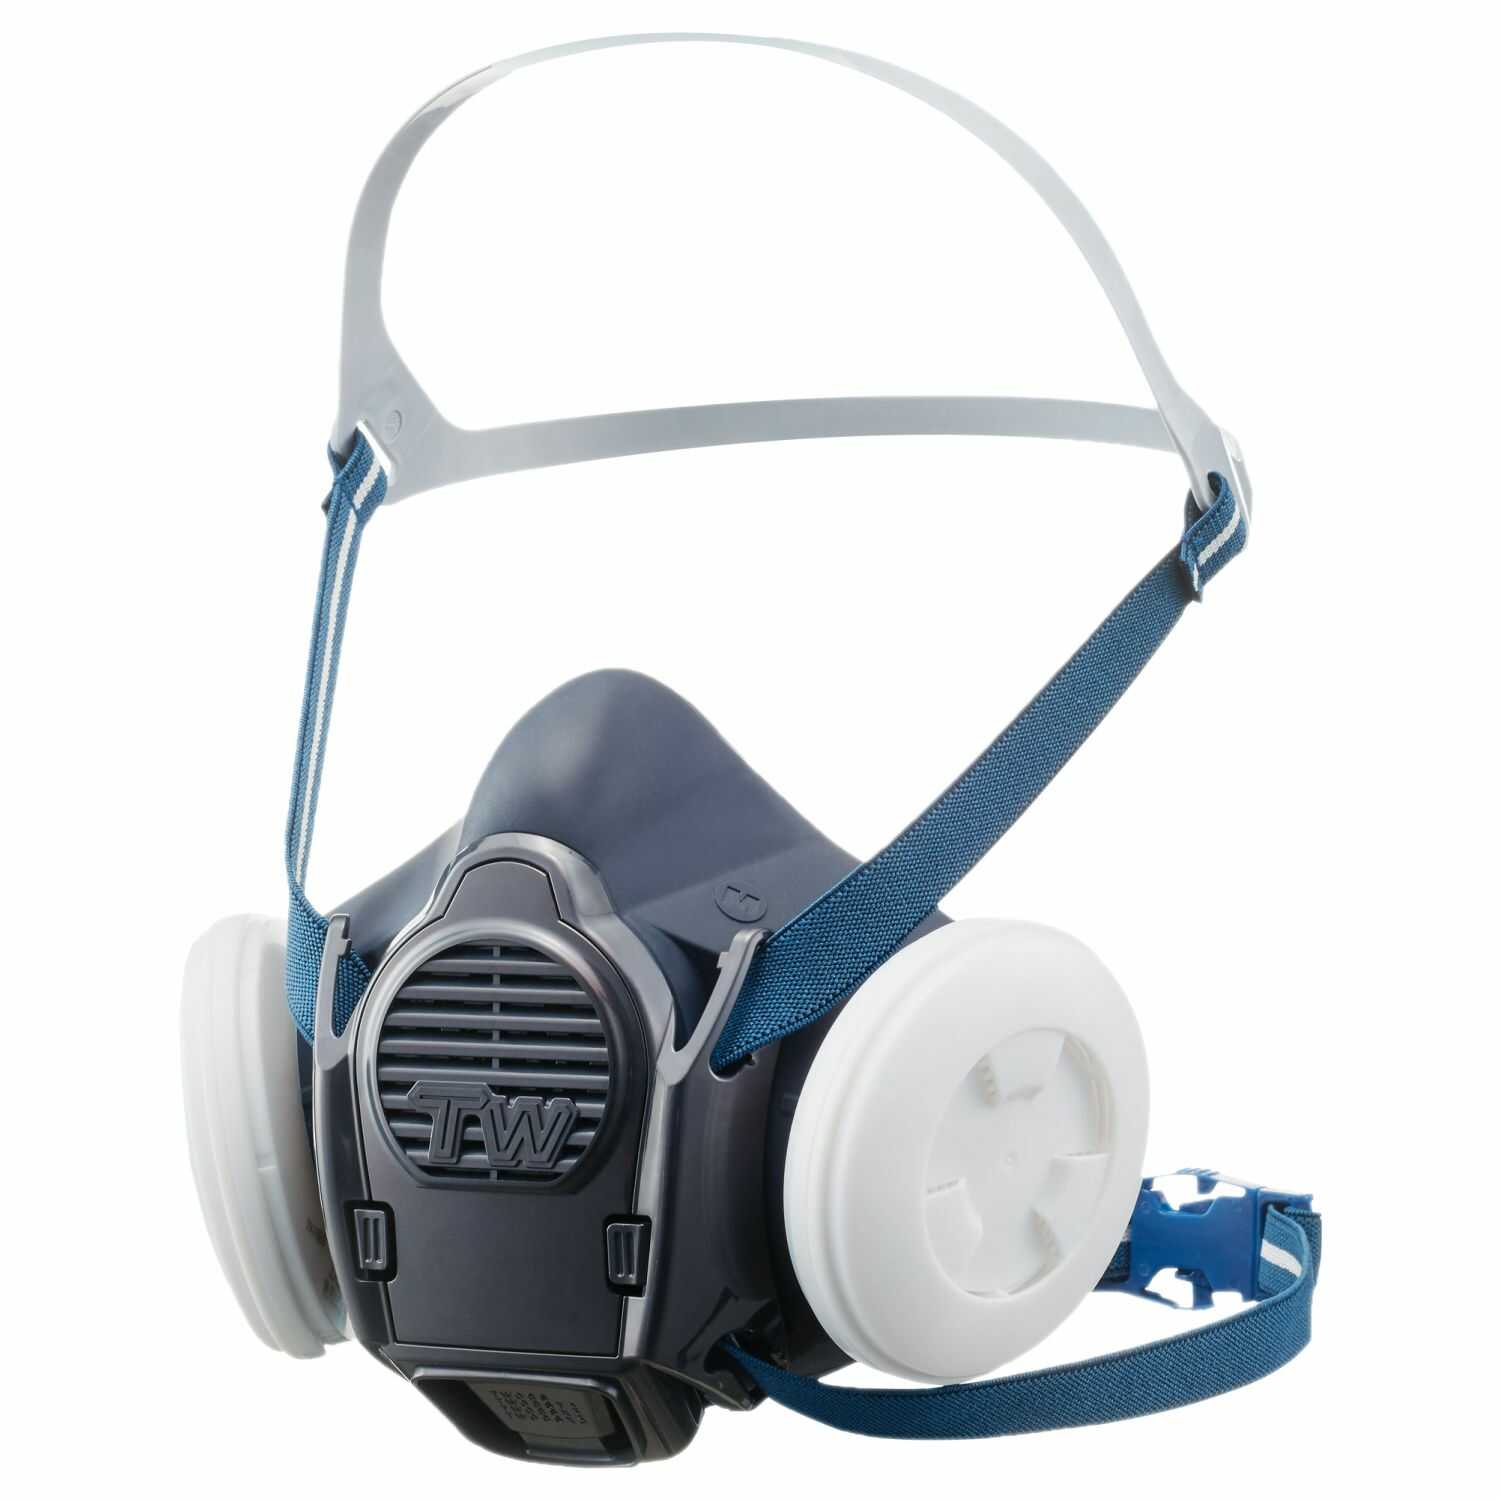 Shigematsu TW08S Reusable Half Face Gas, Respirator with Speaking Diaphragm, Blue, Dual Cartridge, Medium 12162, Pack of 1, (Cartridge not Included)